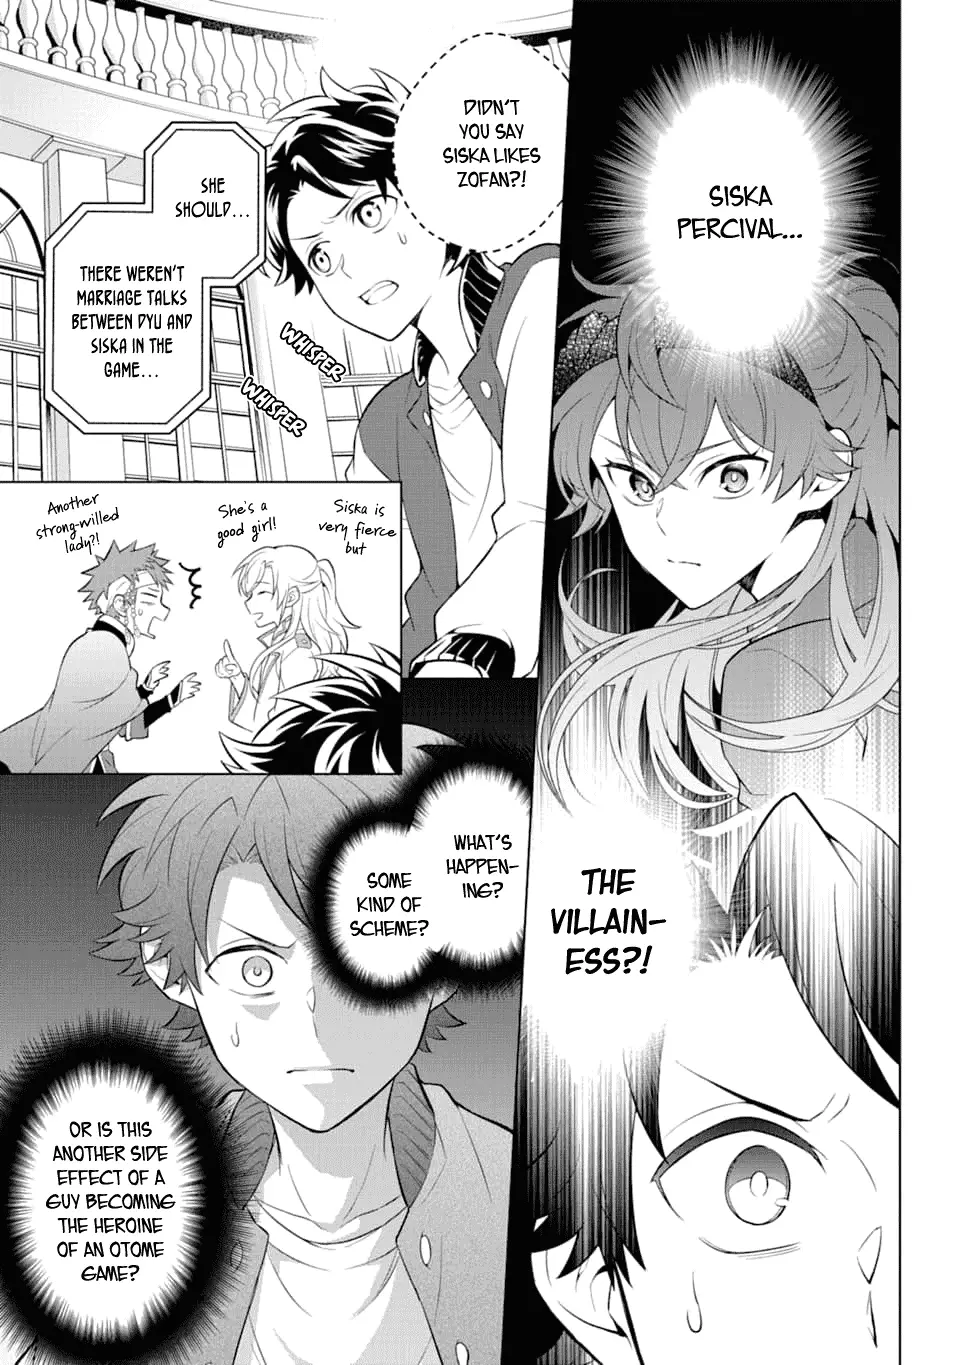 Transferred To Another World, But I'm Saving The World Of An Otome Game!? - 11 page 15